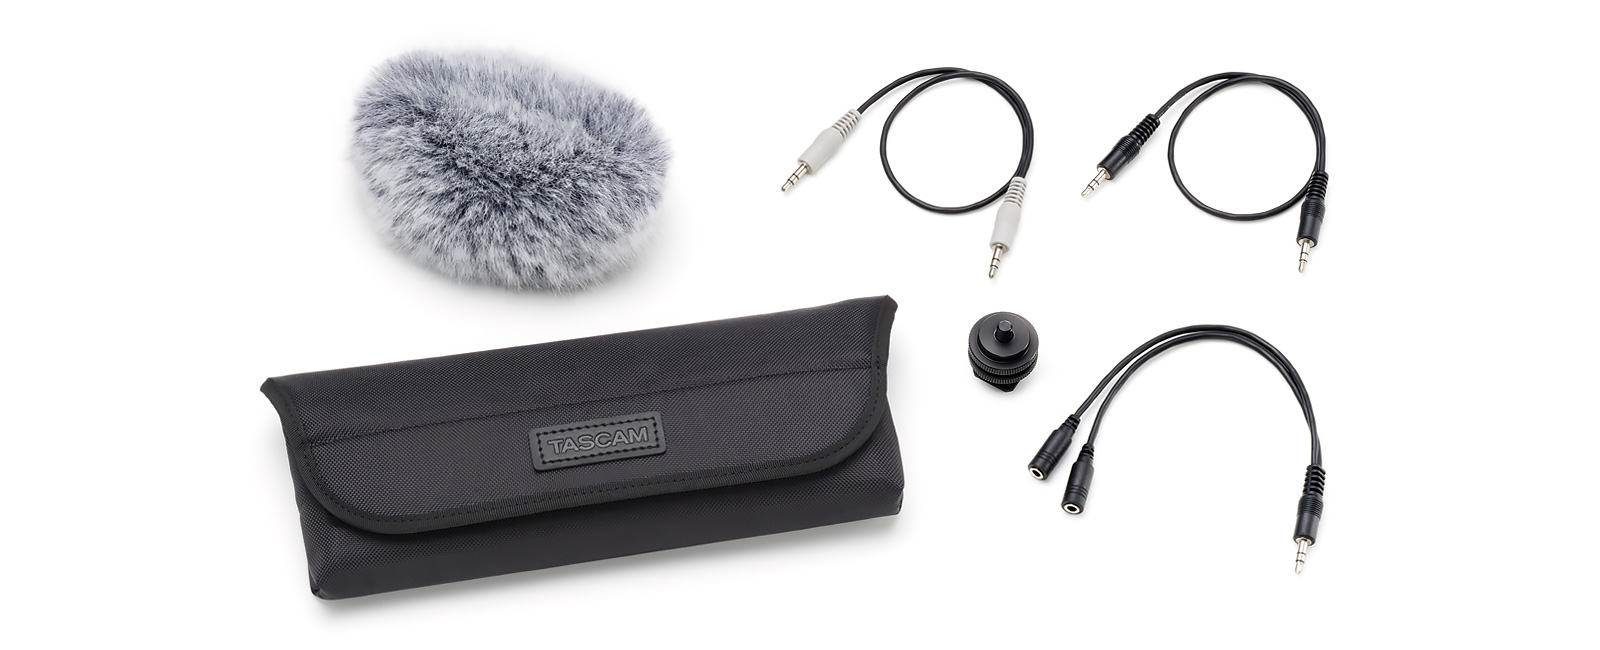 TASCAM Releases New Handheld Recorder Accessory Packs For DR-Series Handheld Recorders